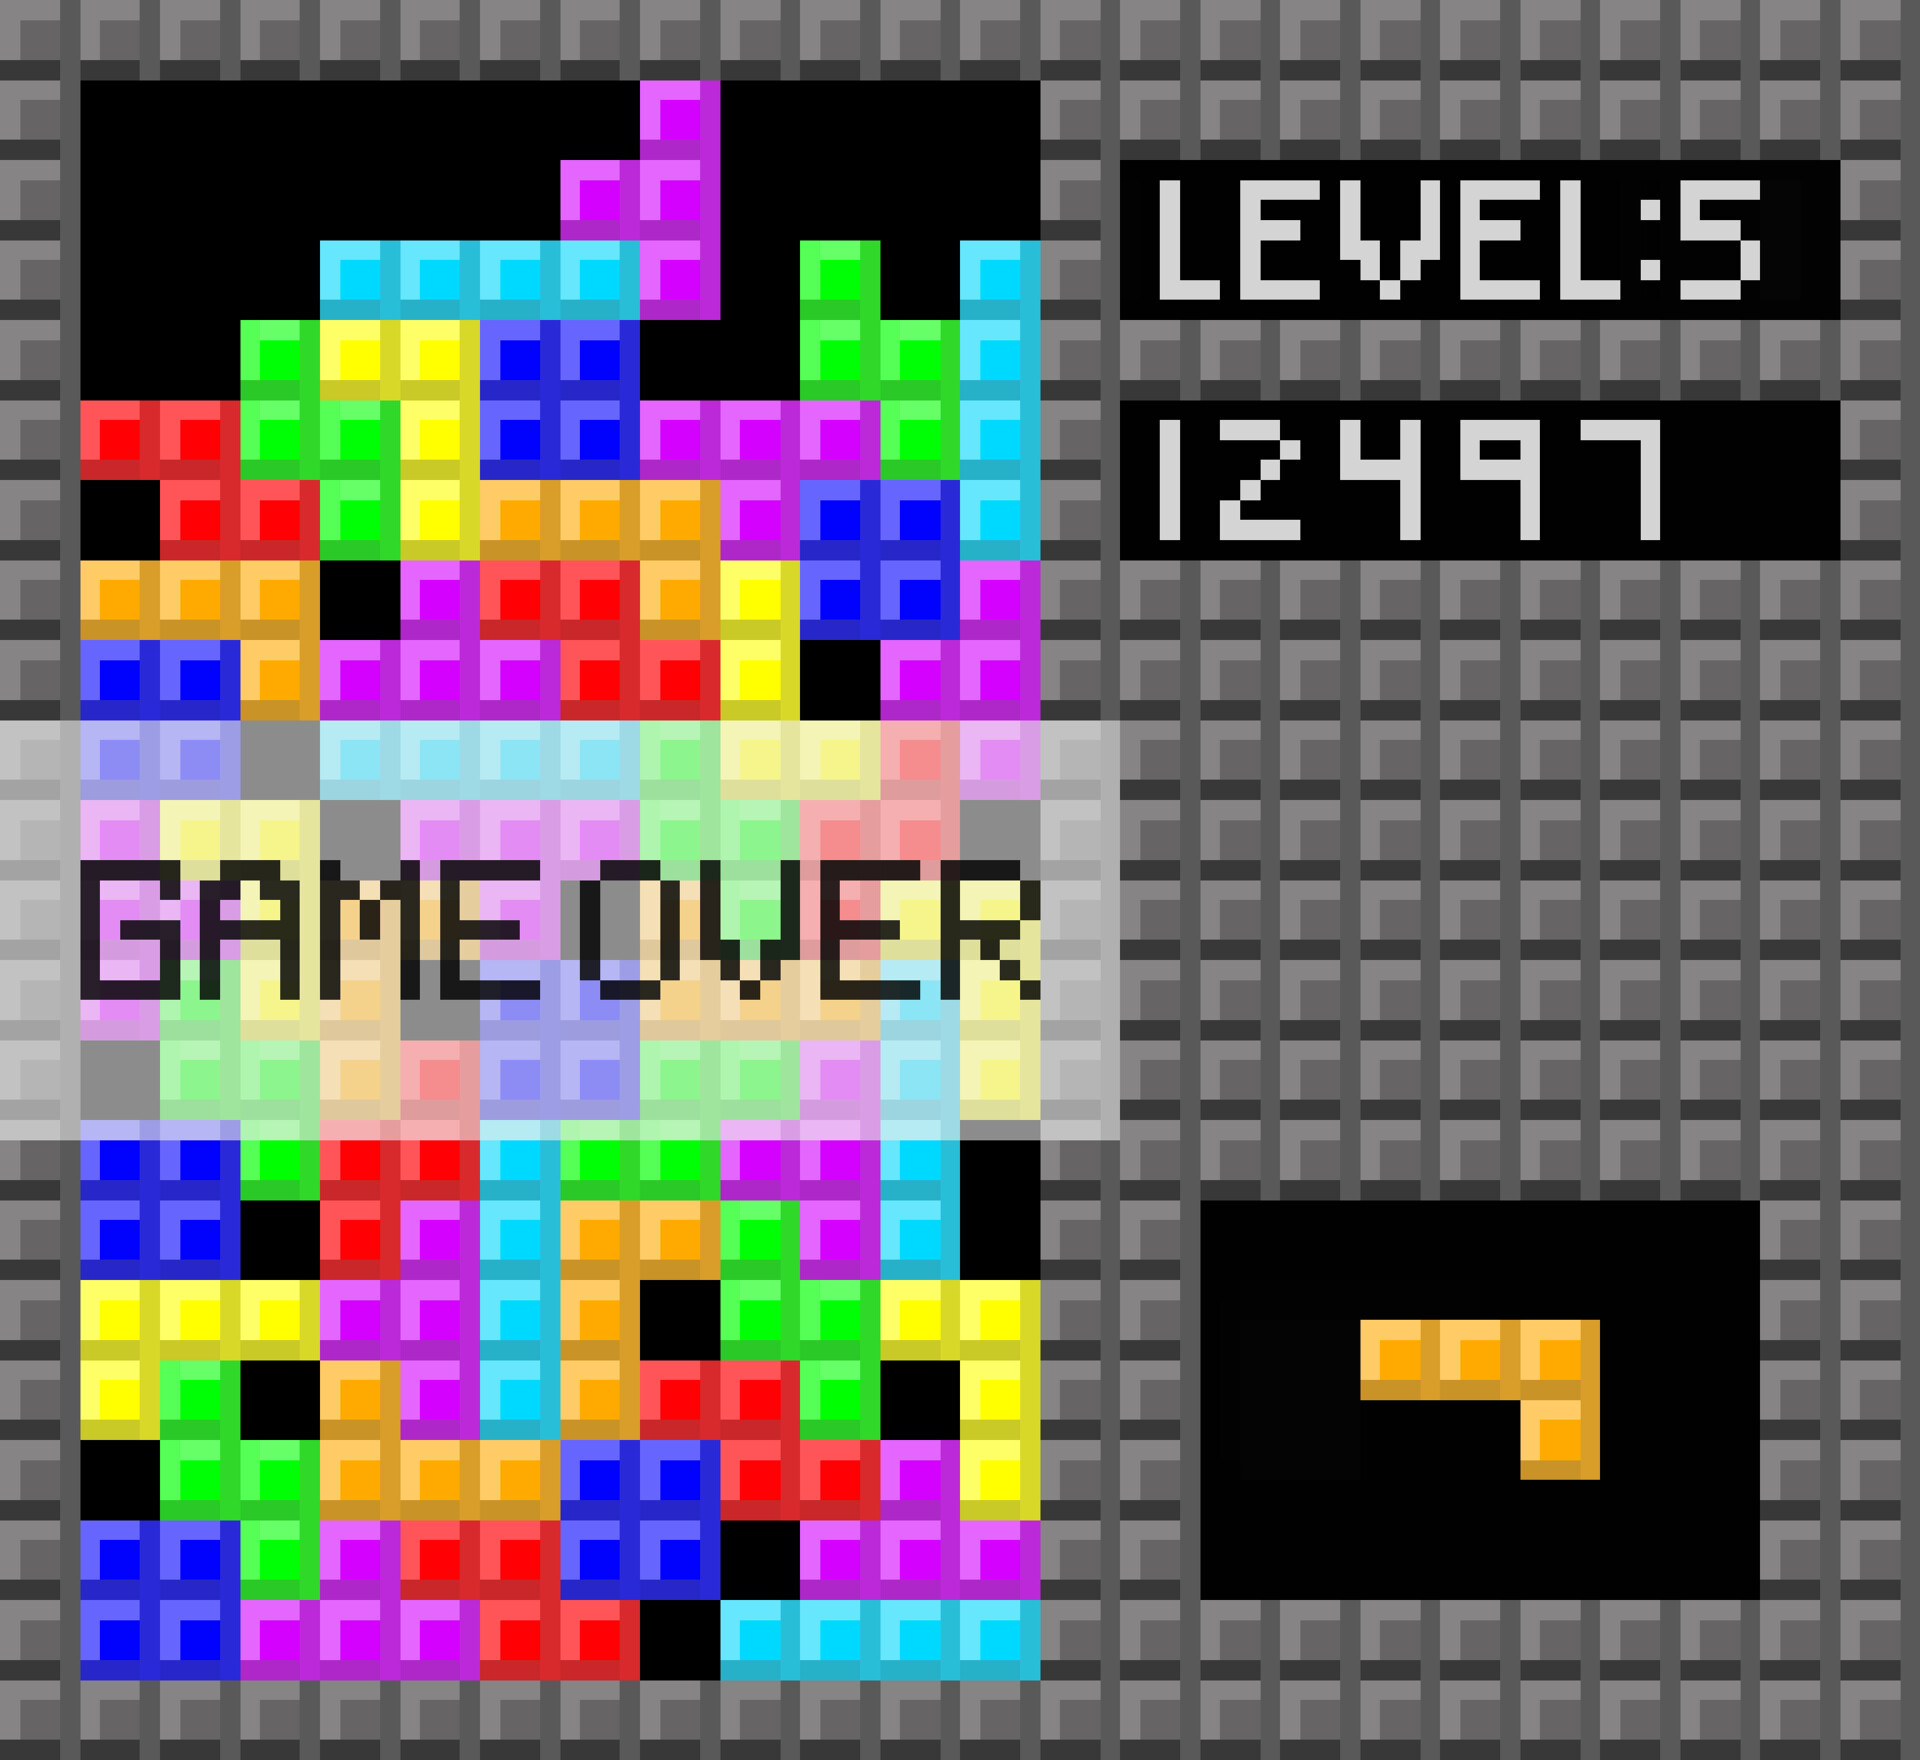 Build Tetris with Pygame #14 - Game Over 